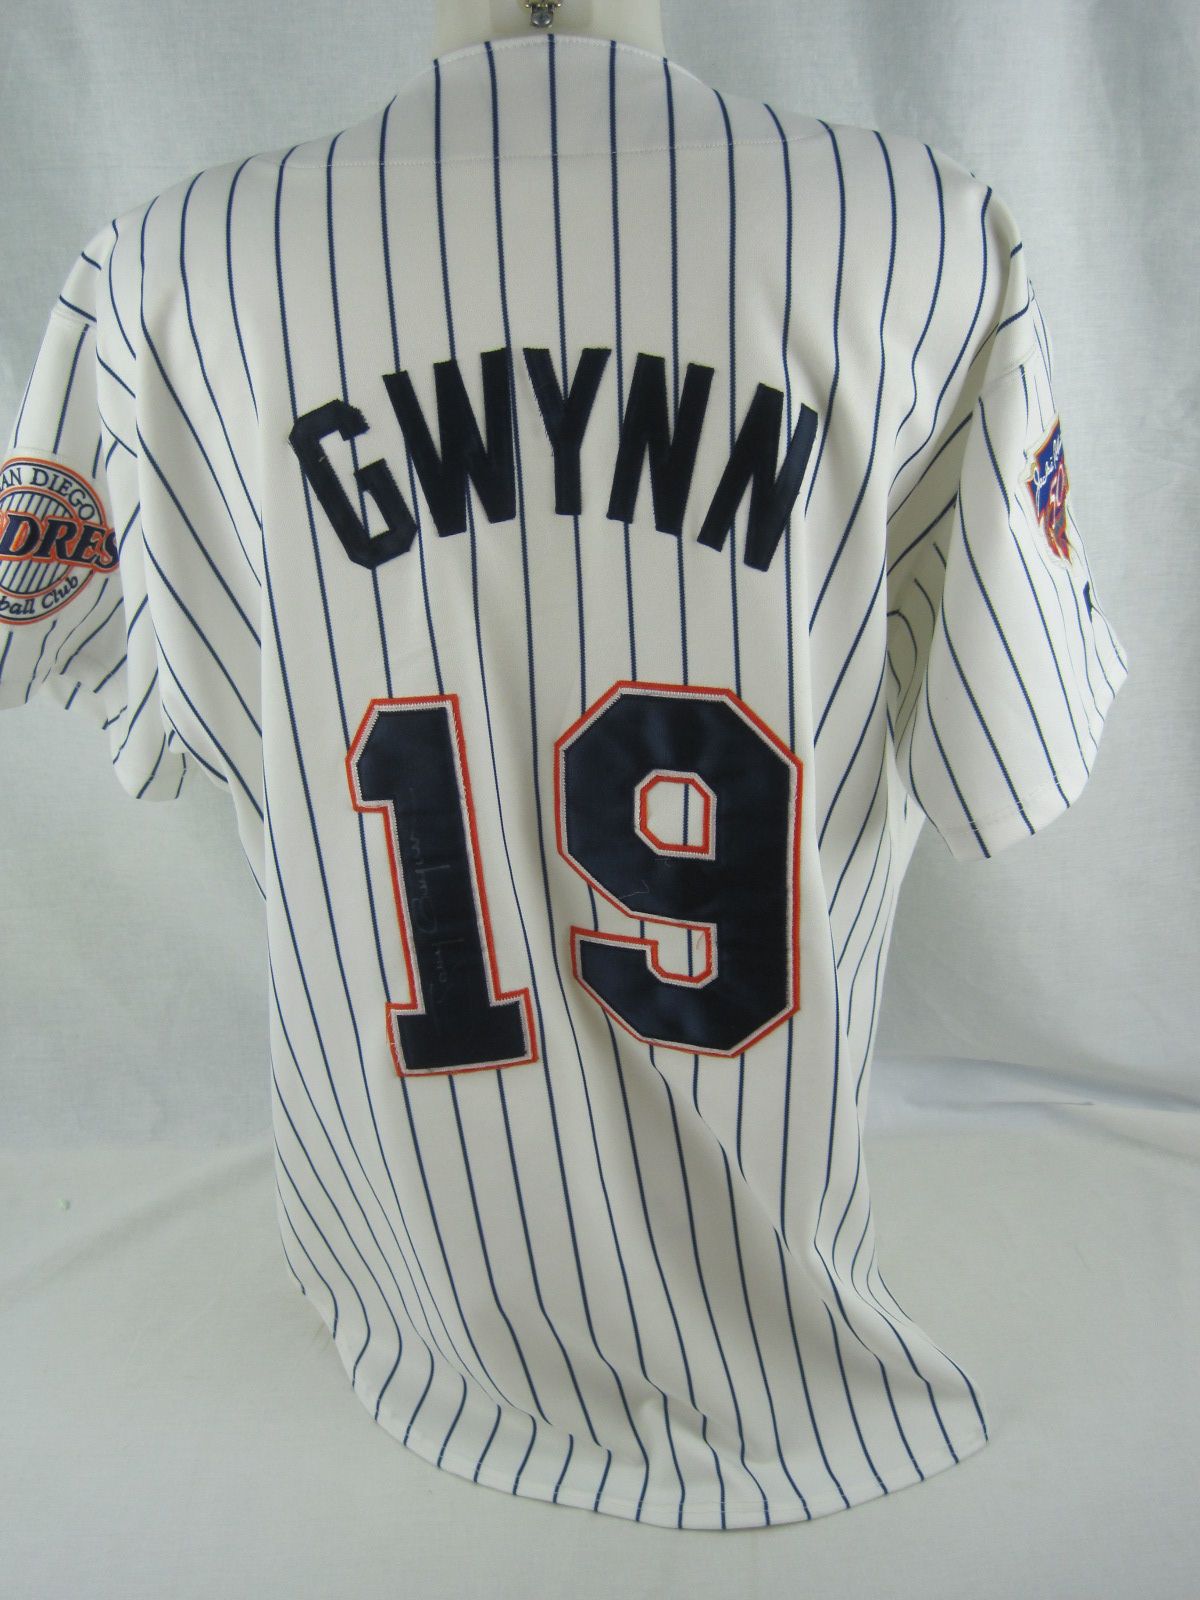 Sold at Auction: Tony Gwynn autographed San Diego Padres professional model  jersey with pants c.1997.